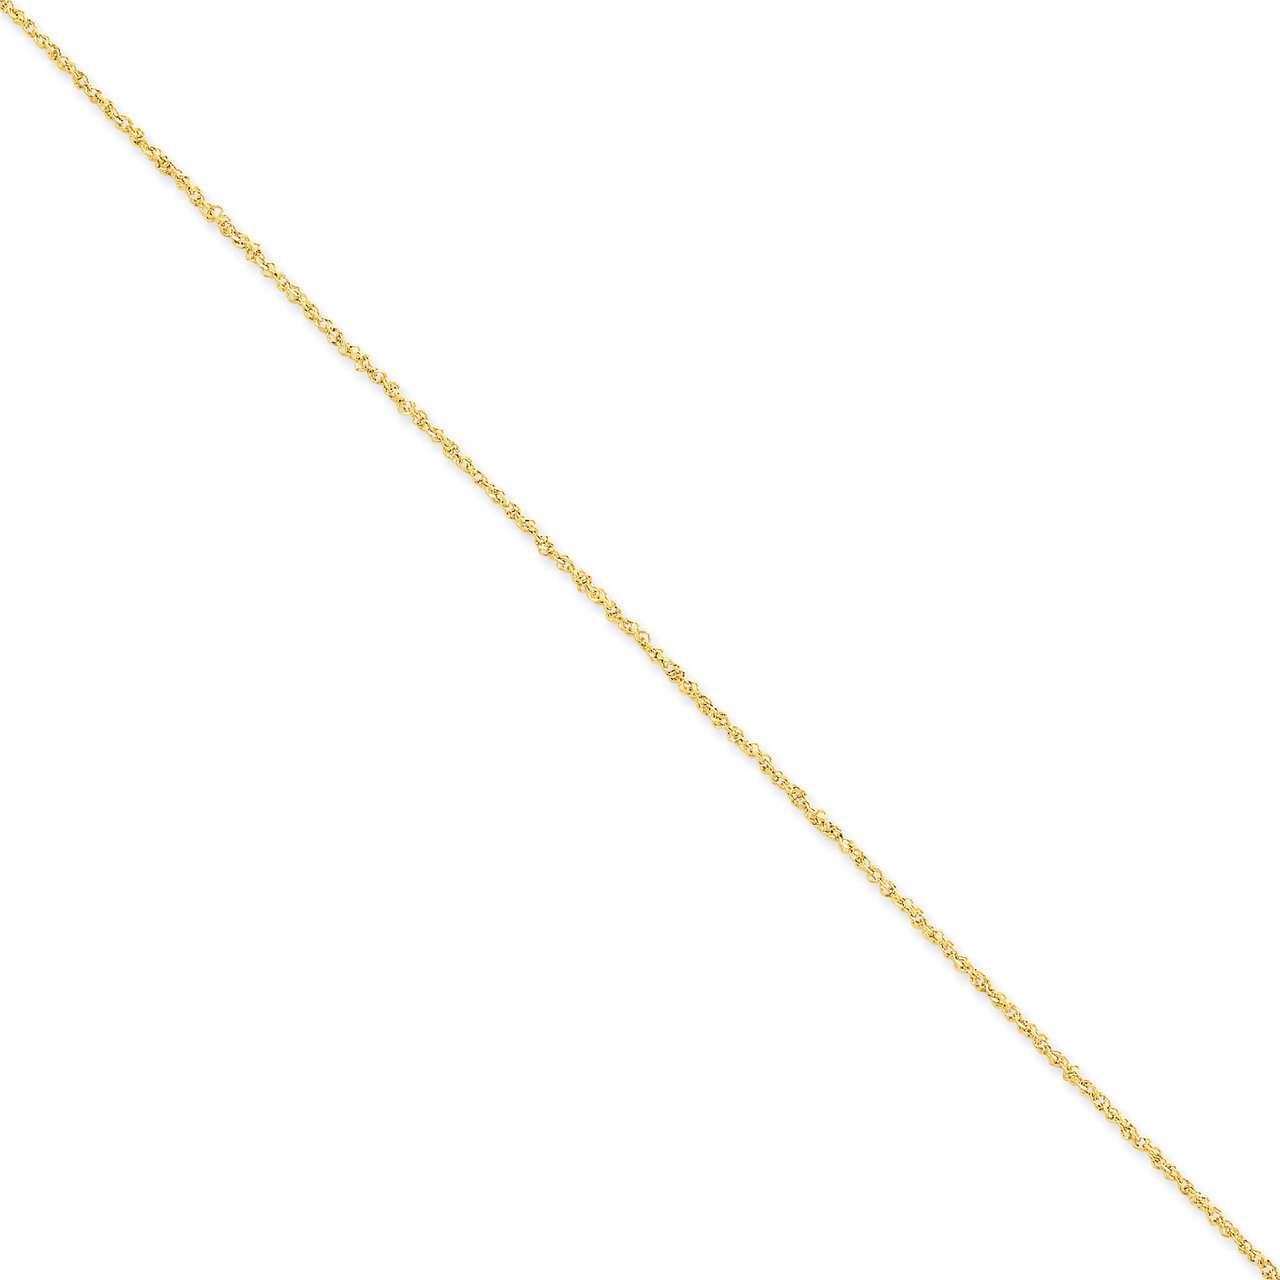 1.7mm Ropa Chain 20 Inch 14k Gold RPA028-20